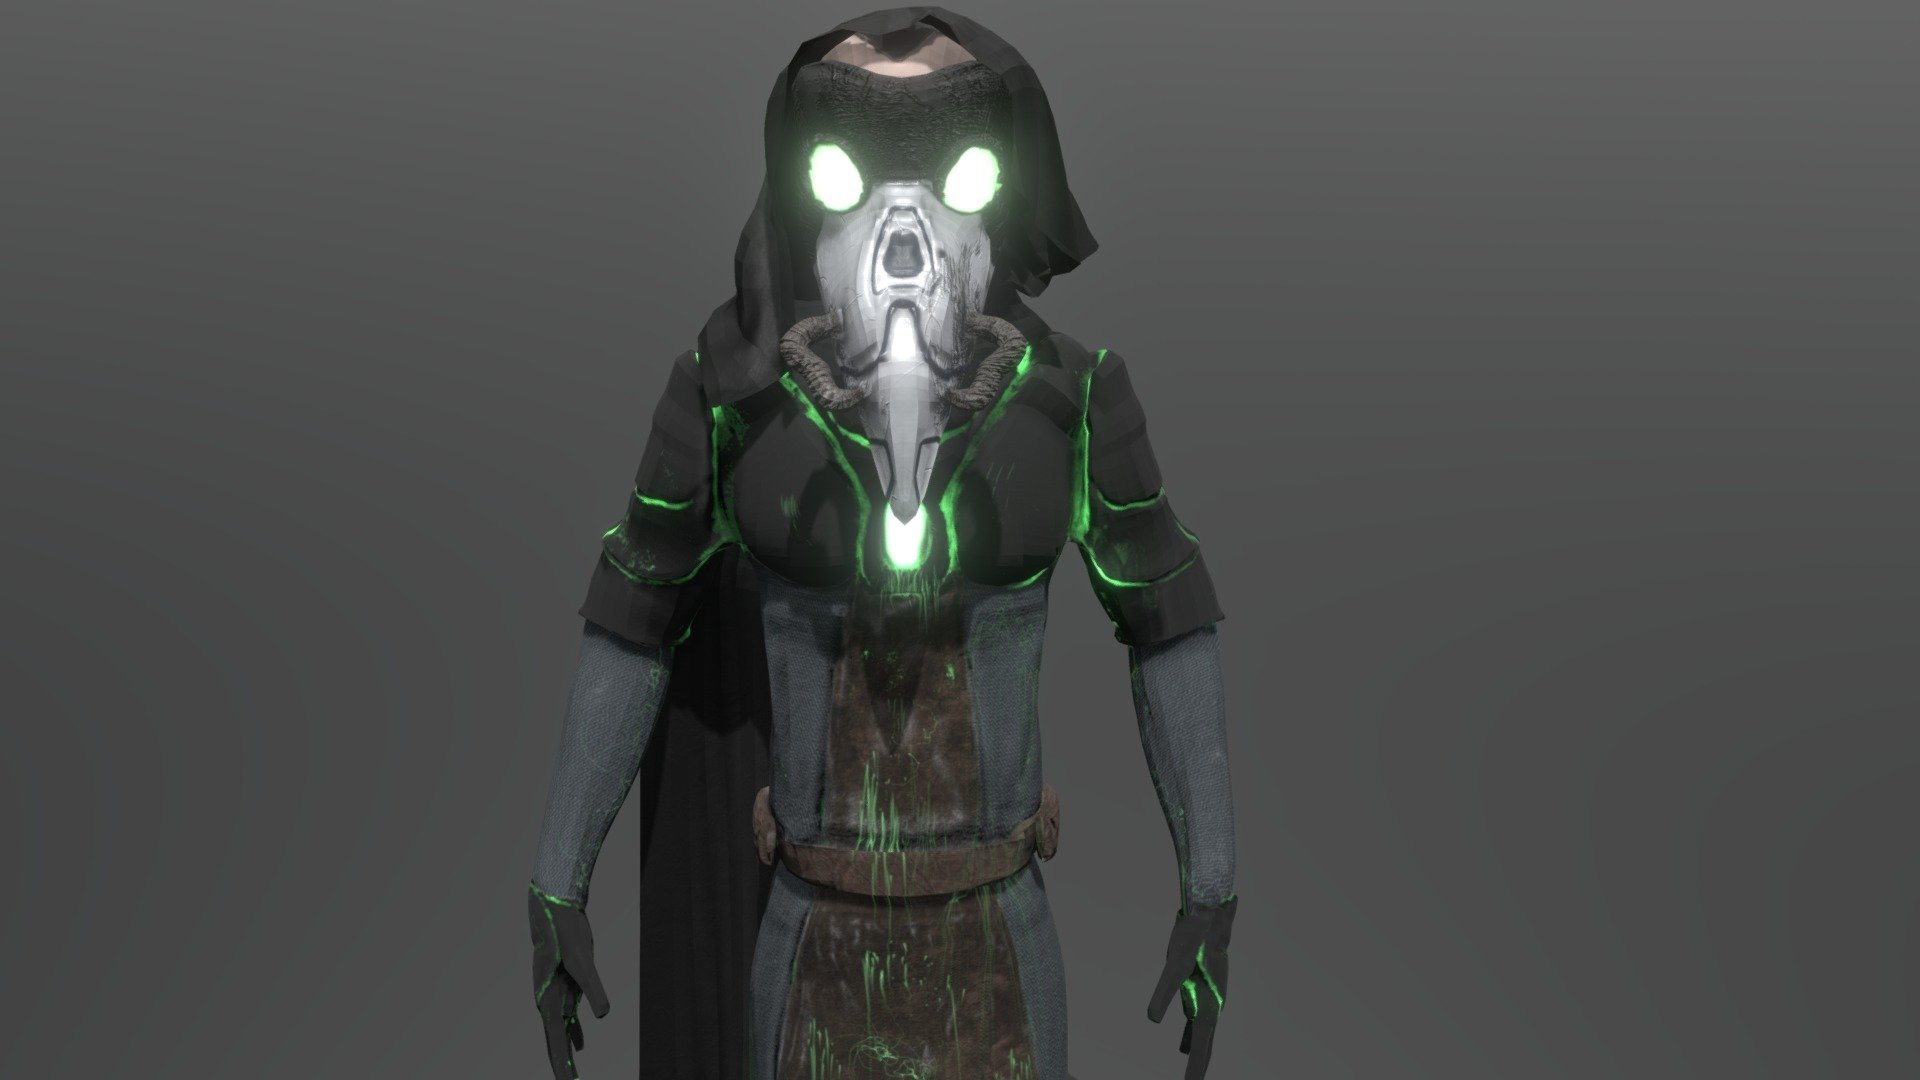 Just a character i made using zbrush and substance painter. The cloak was made using marvelous designer and it doesn't have bones so that engine can take care for the cloth physics (I think it's better than manually animate). The animations were made in blender 3d model